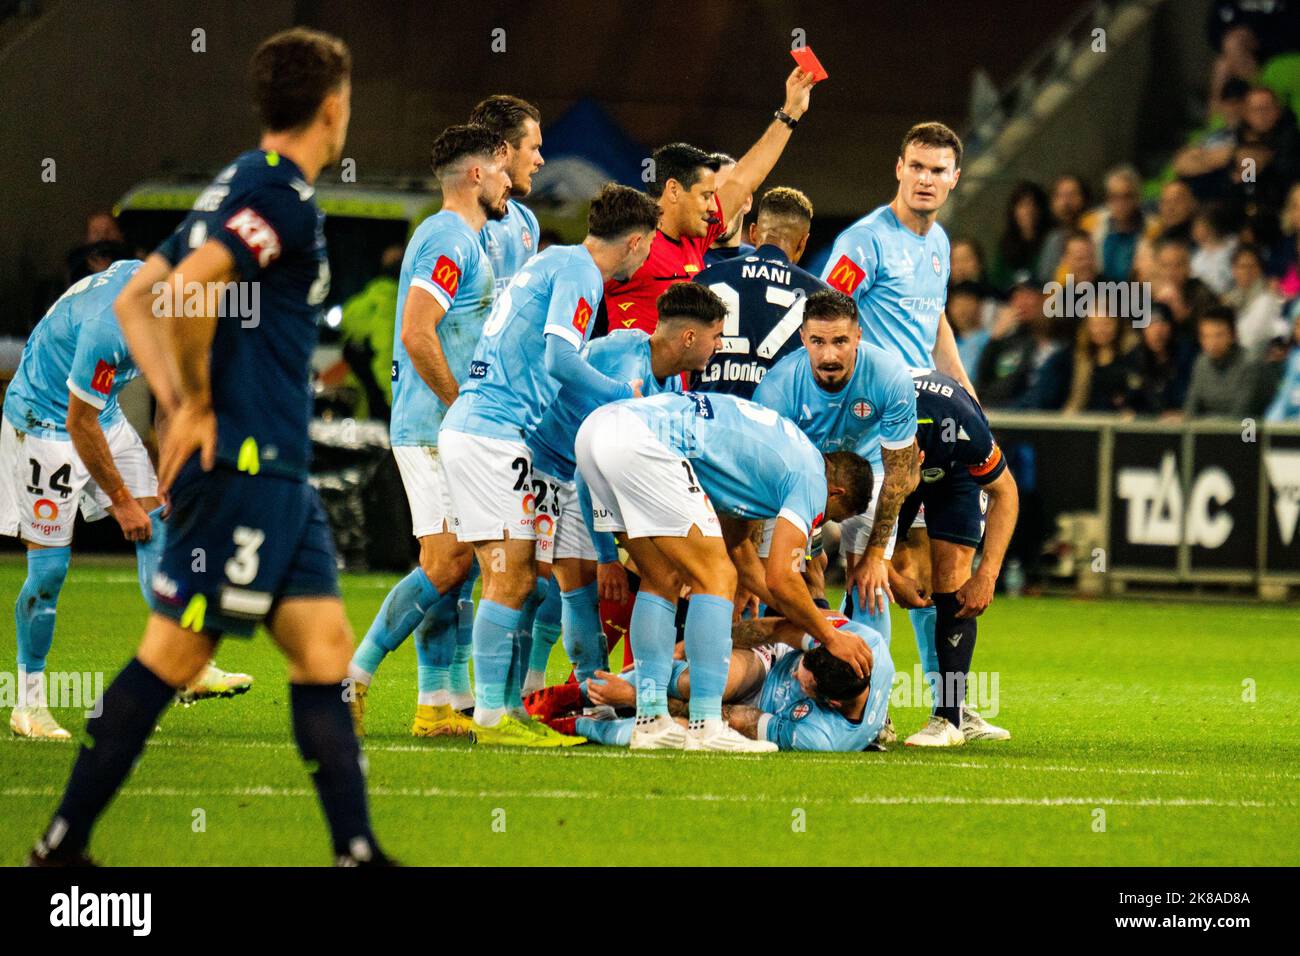 Melbourne, Australia. 22, October, 2022. Match Official Alireza Faghani presents Melbourne Victory Captain Josh Brilliant with a red card after getting a second yellow during the Round 3 of Isuzu UTE A-League Men’s 2022/23 season between Melbourne Victory and Melbourne City.  Credit: James Forrester/Alamy Live News. Stock Photo